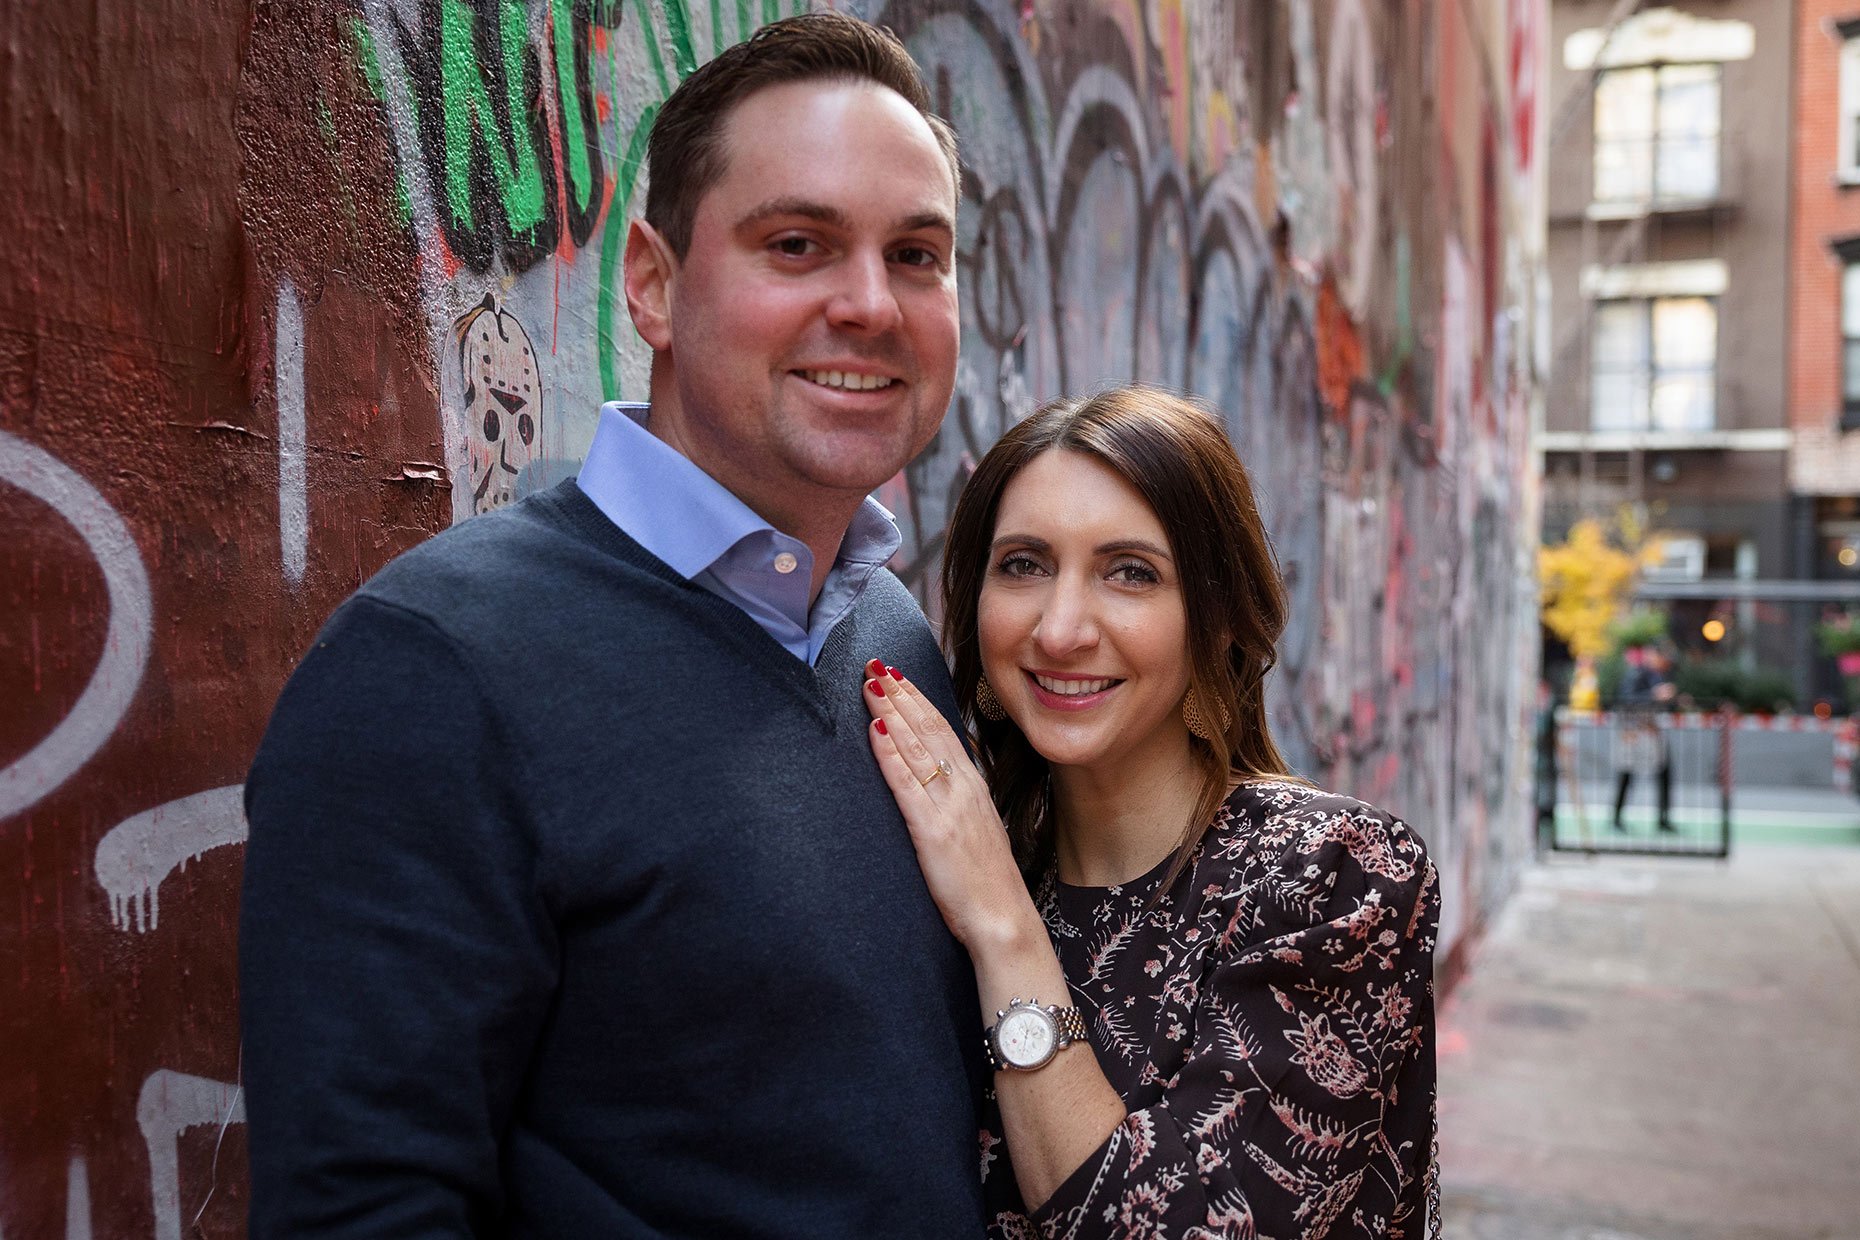 Engagment Photo in front of Graffiti wall at Freeman's Alley